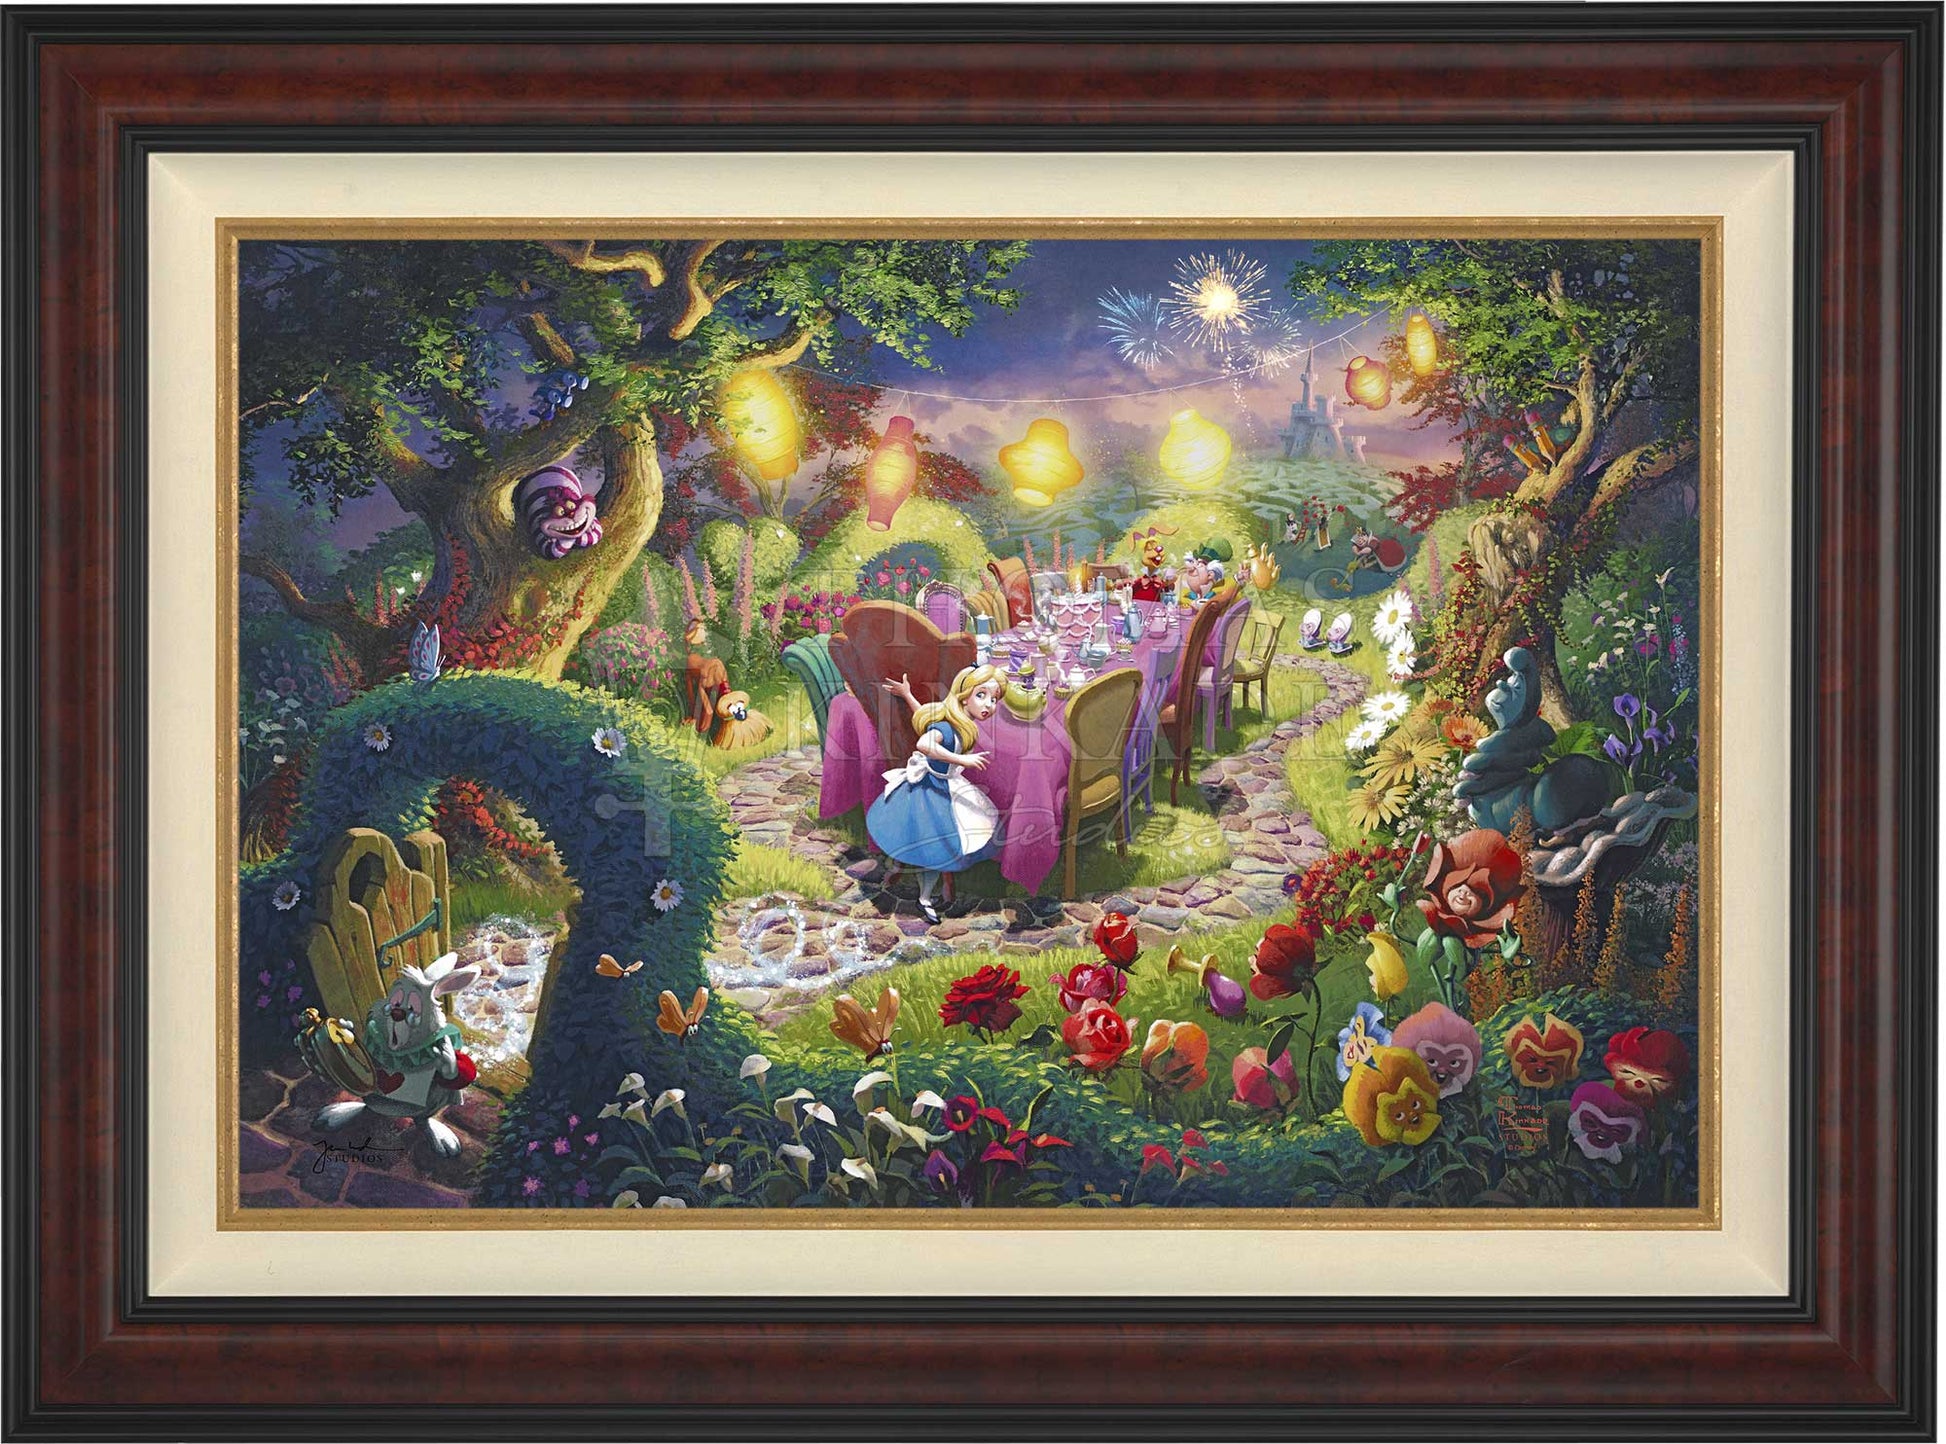 Alice in Wonderland, Mad Hatters Tea Party available as Framed